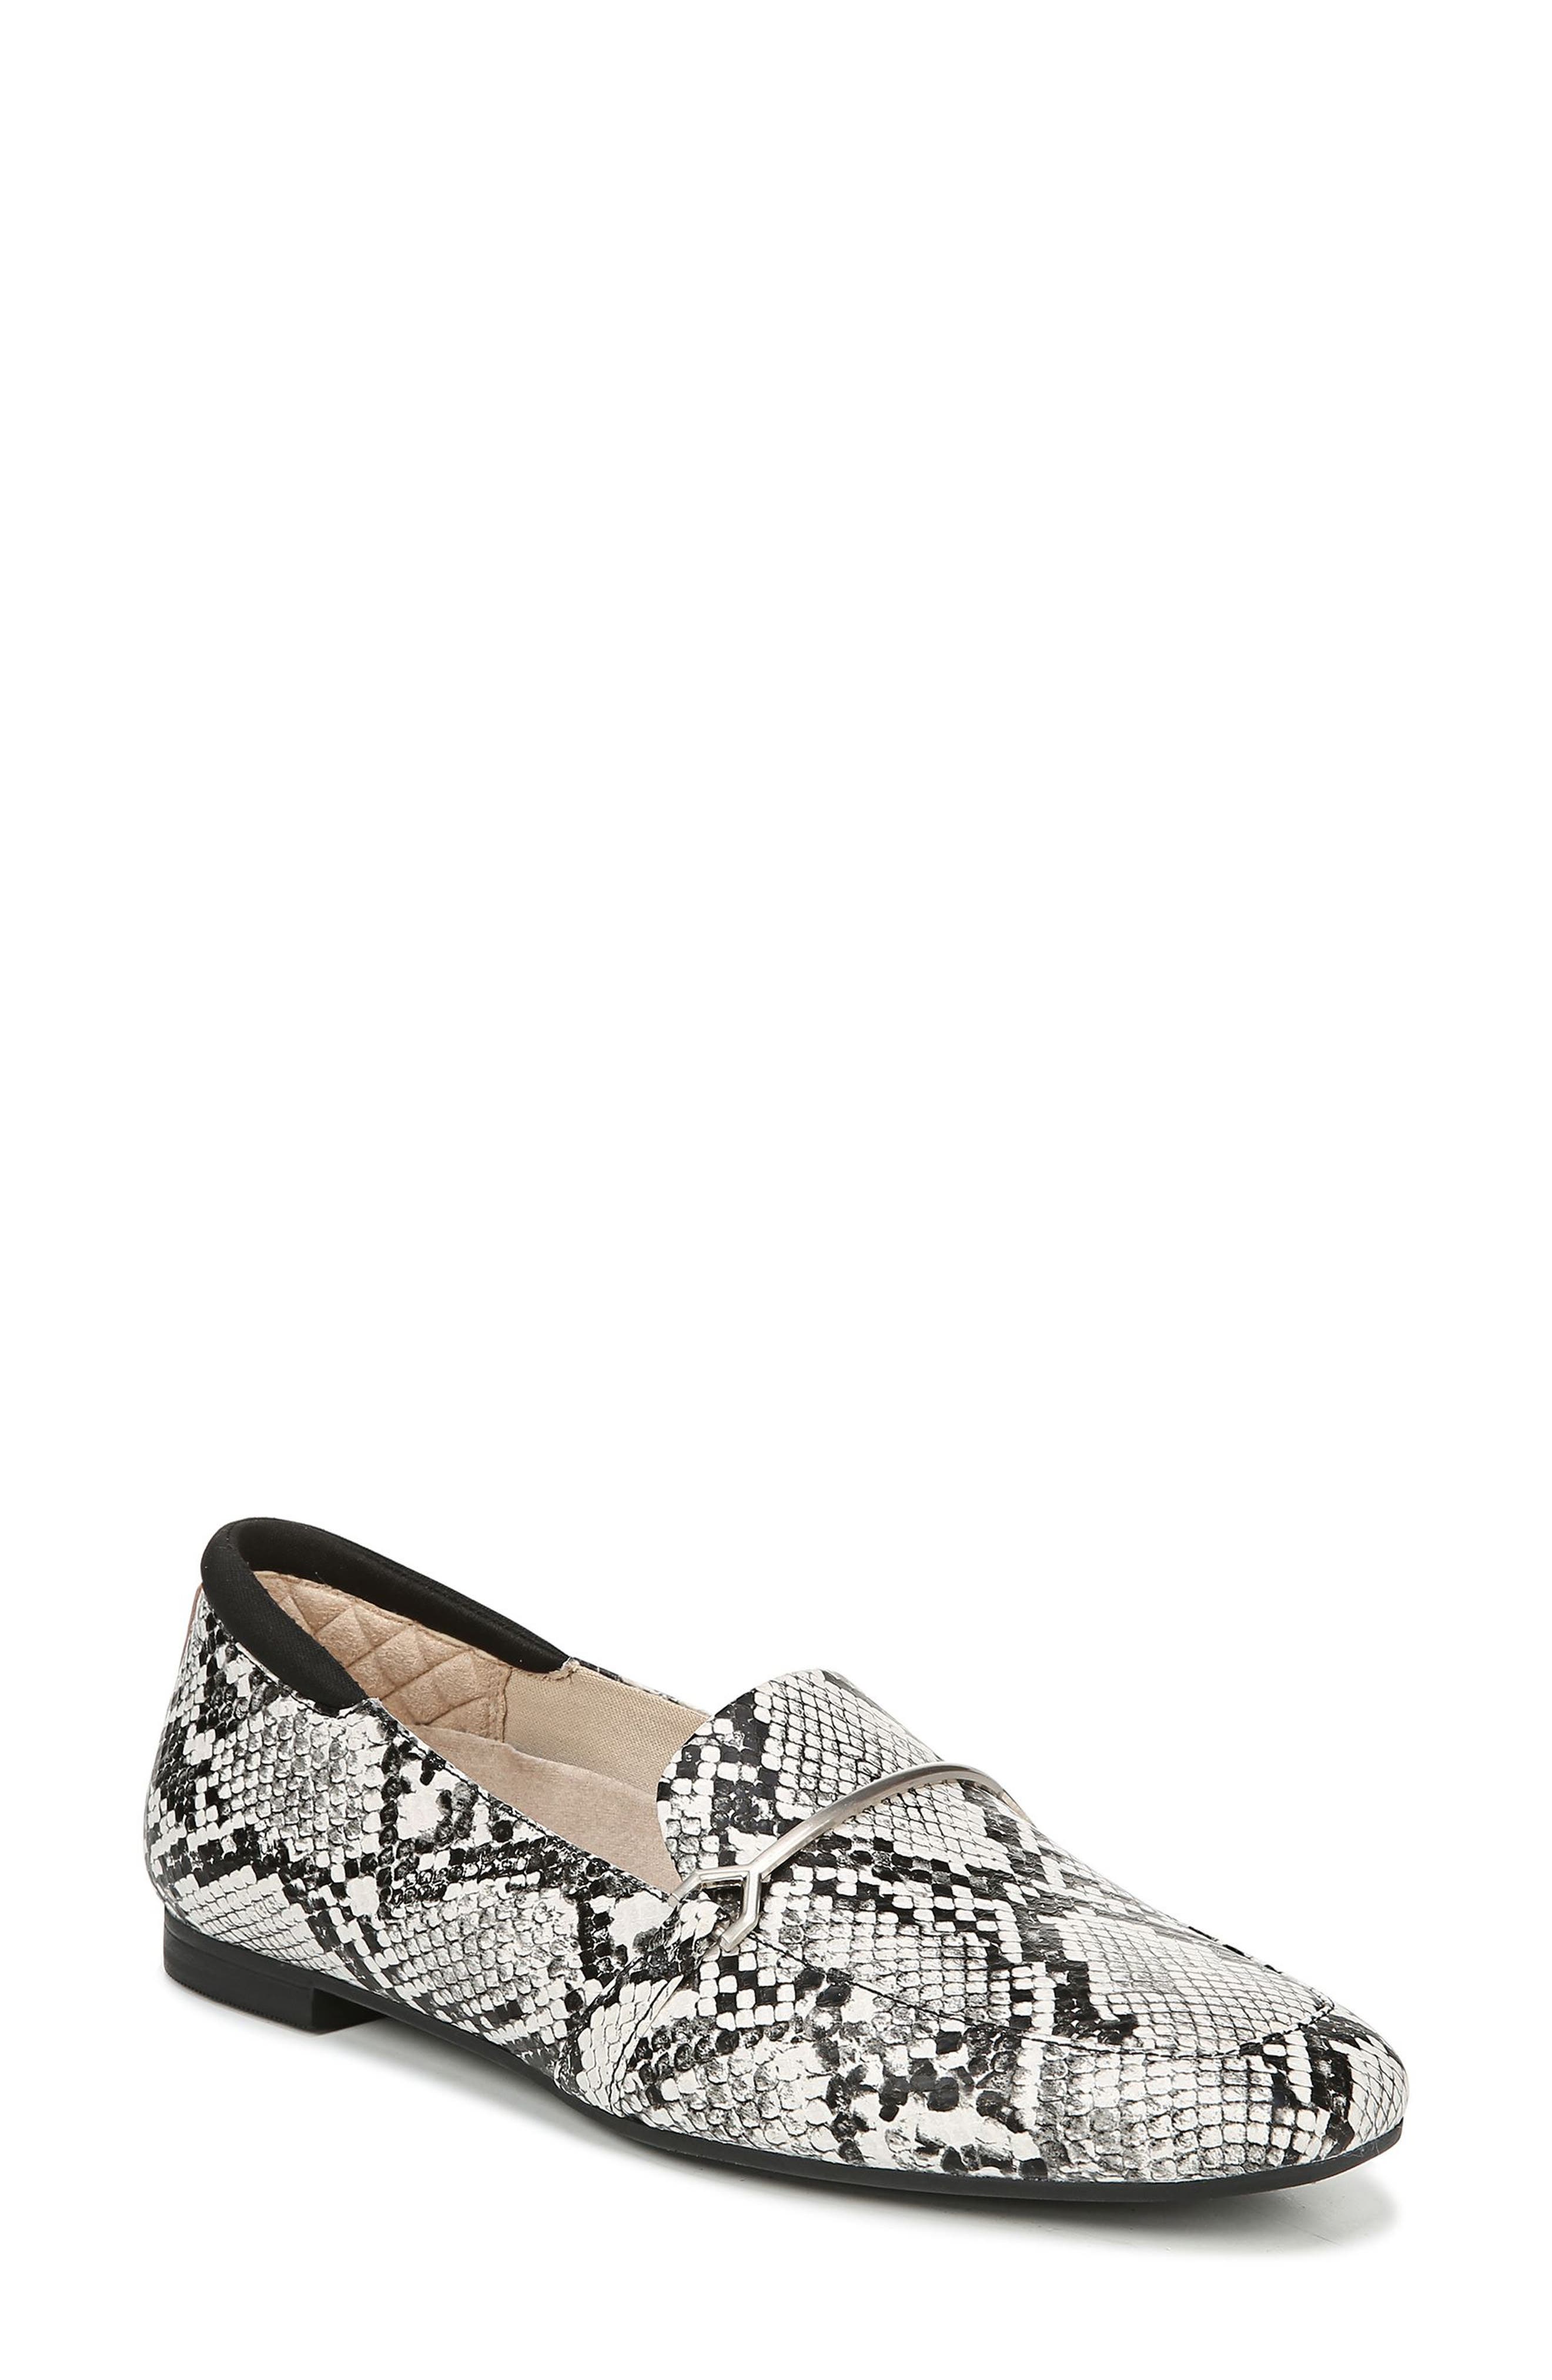 Dr. Scholl's Dr. Scholls Mercury Loafer In Snake Print Leather